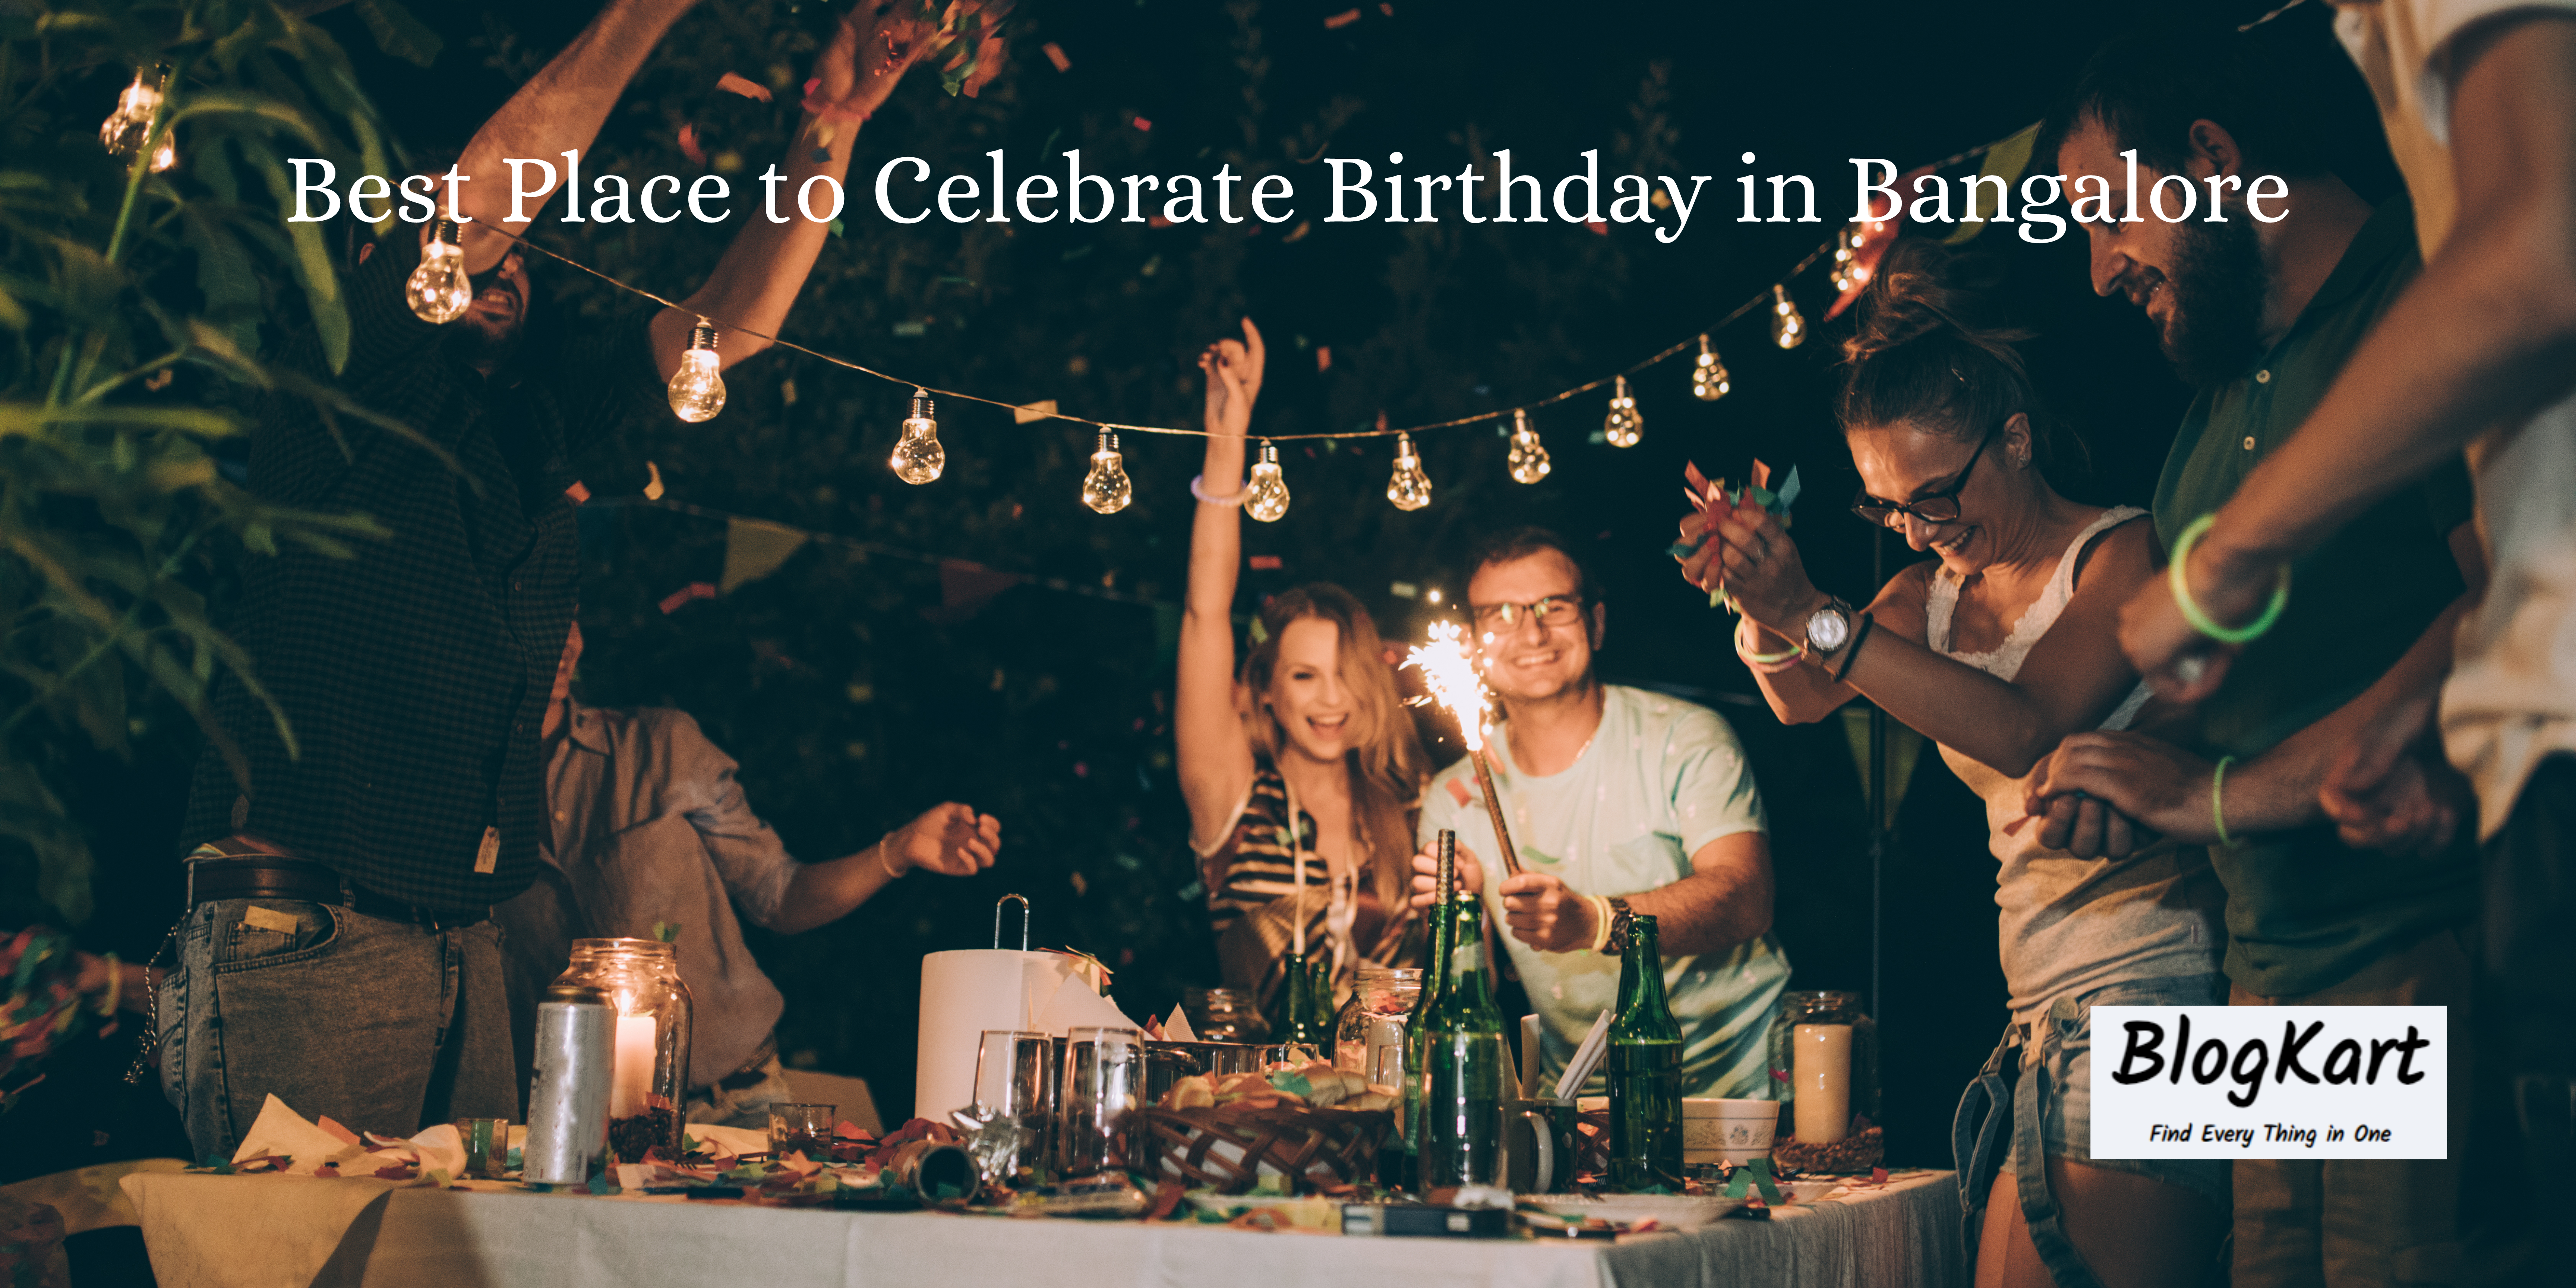 Place to Celebrate Birthday in Bangalore